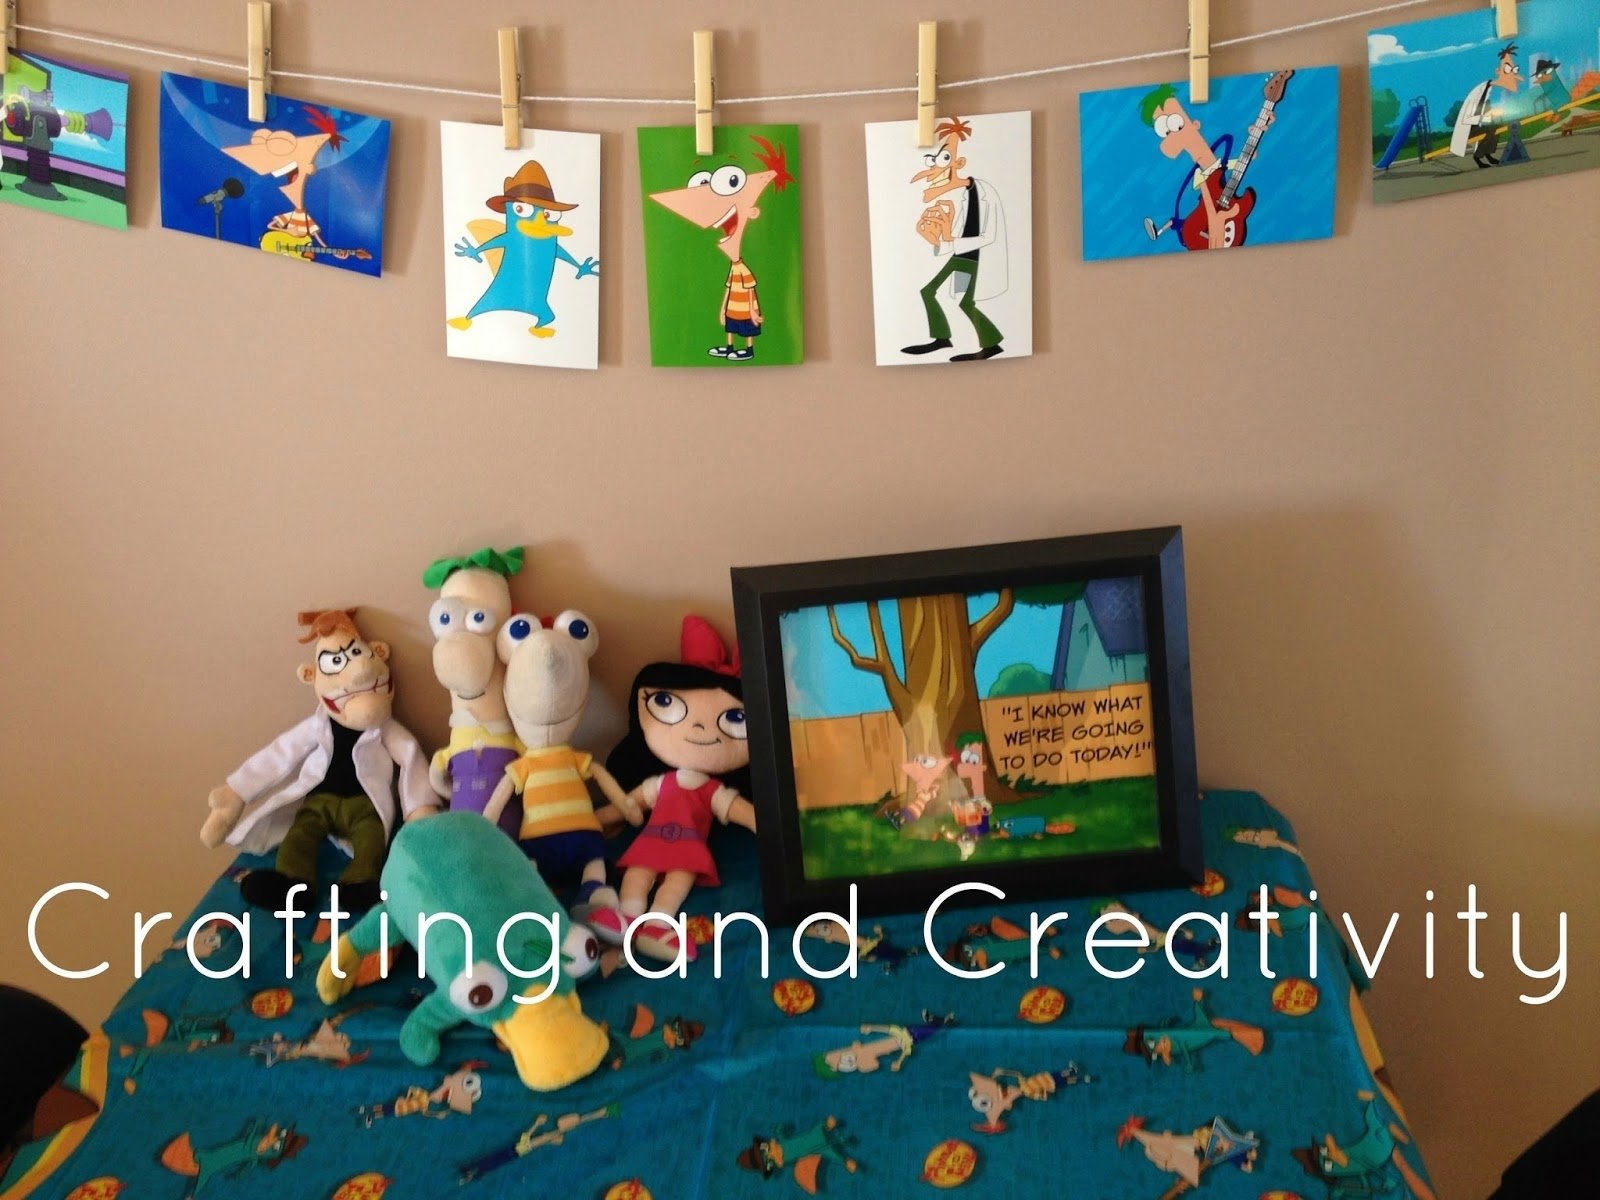 10 Elegant Phineas And Ferb Birthday Party Ideas crafting and creativity my sons 7th birthday party phineas and 1 2022